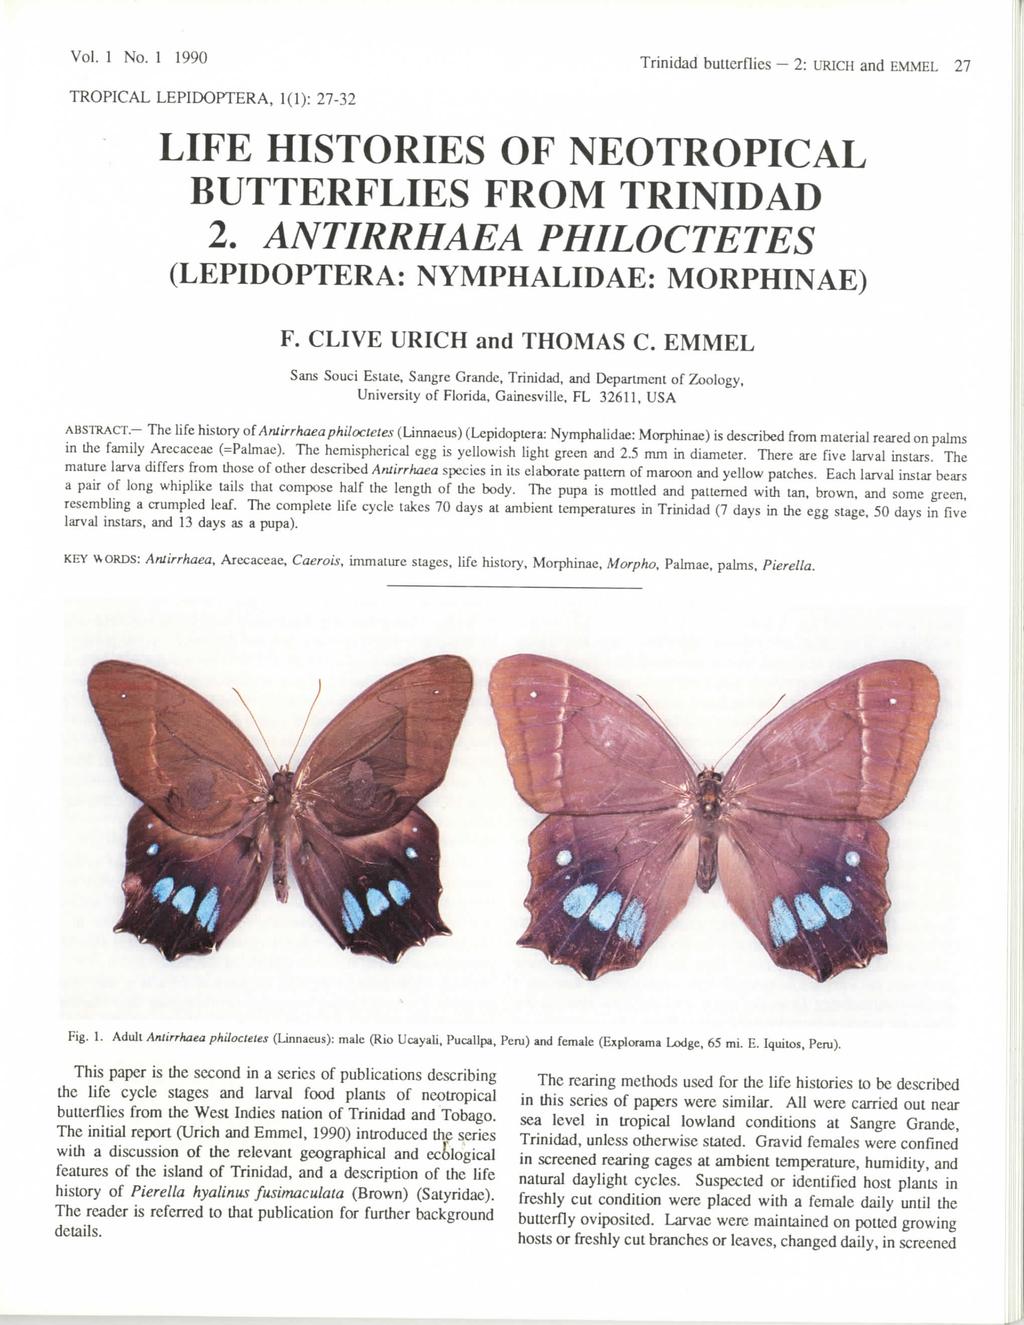 Vol. 1 No. 1 1990 Trinidad butterflies 2: URICH and EMMEL 27 TROPICAL LEPIDOPTERA, 1(1): 27-32 LIFE HISTORIES OF NEOTROPICAL BUTTERFLIES FROM TRINIDAD 2.